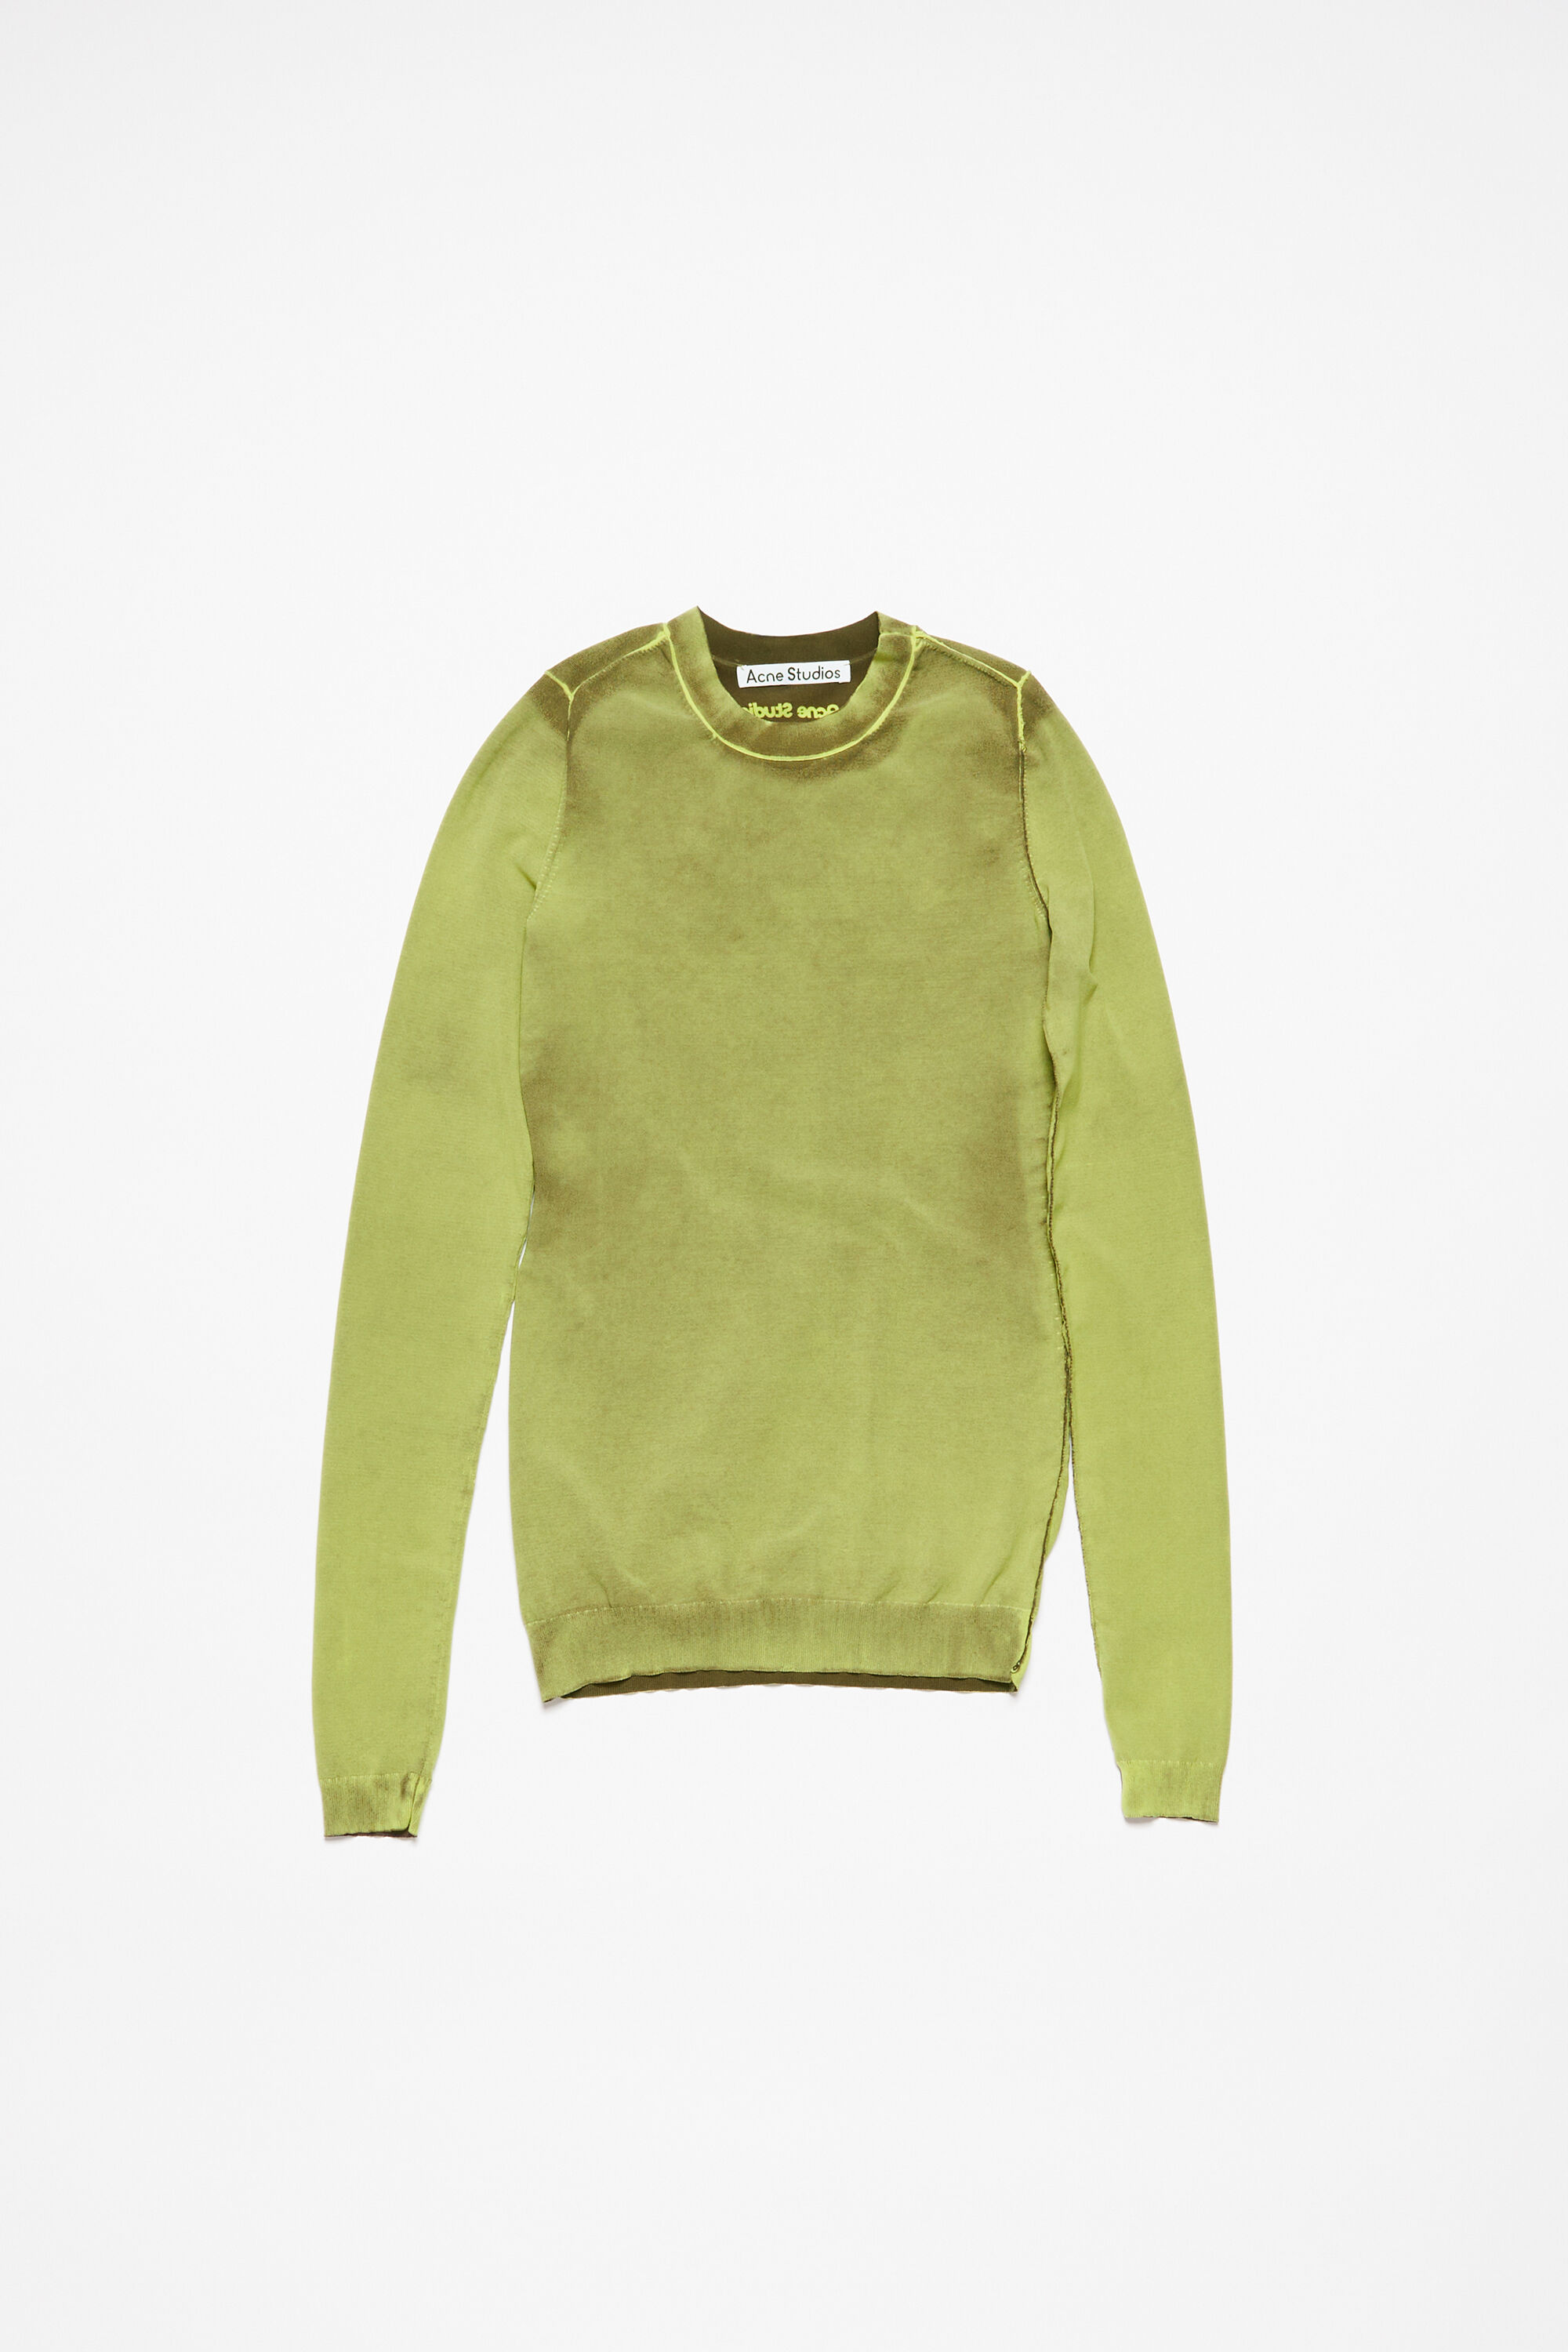 Acne Studios - Long sleeve cut-out t-shirt - Lime green